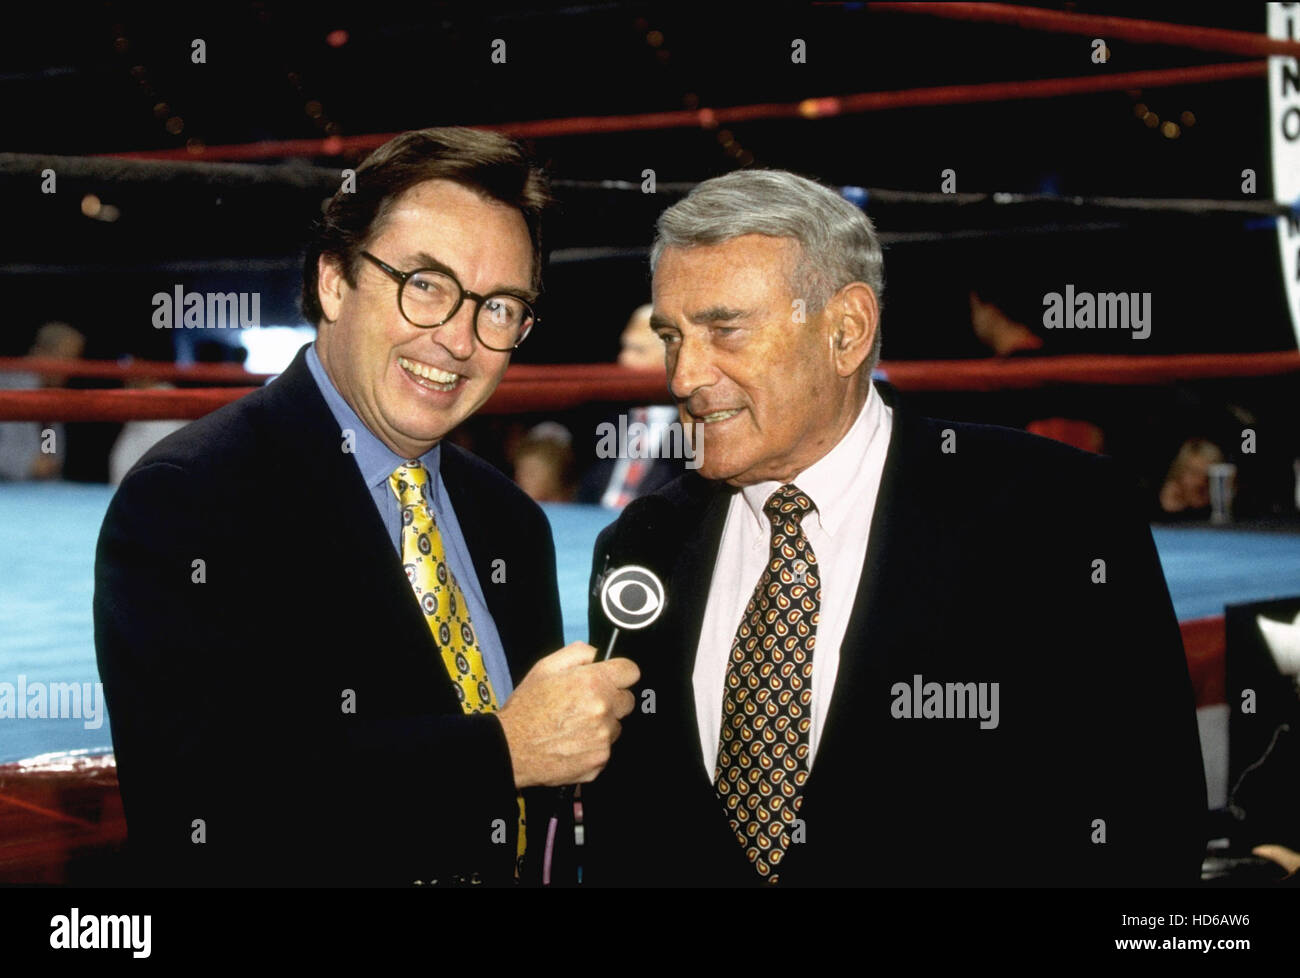 CBS SPORTS , (from left) boxing broadcasters Tim Ryan, Gil Clancy, at the Larry Holmes vs